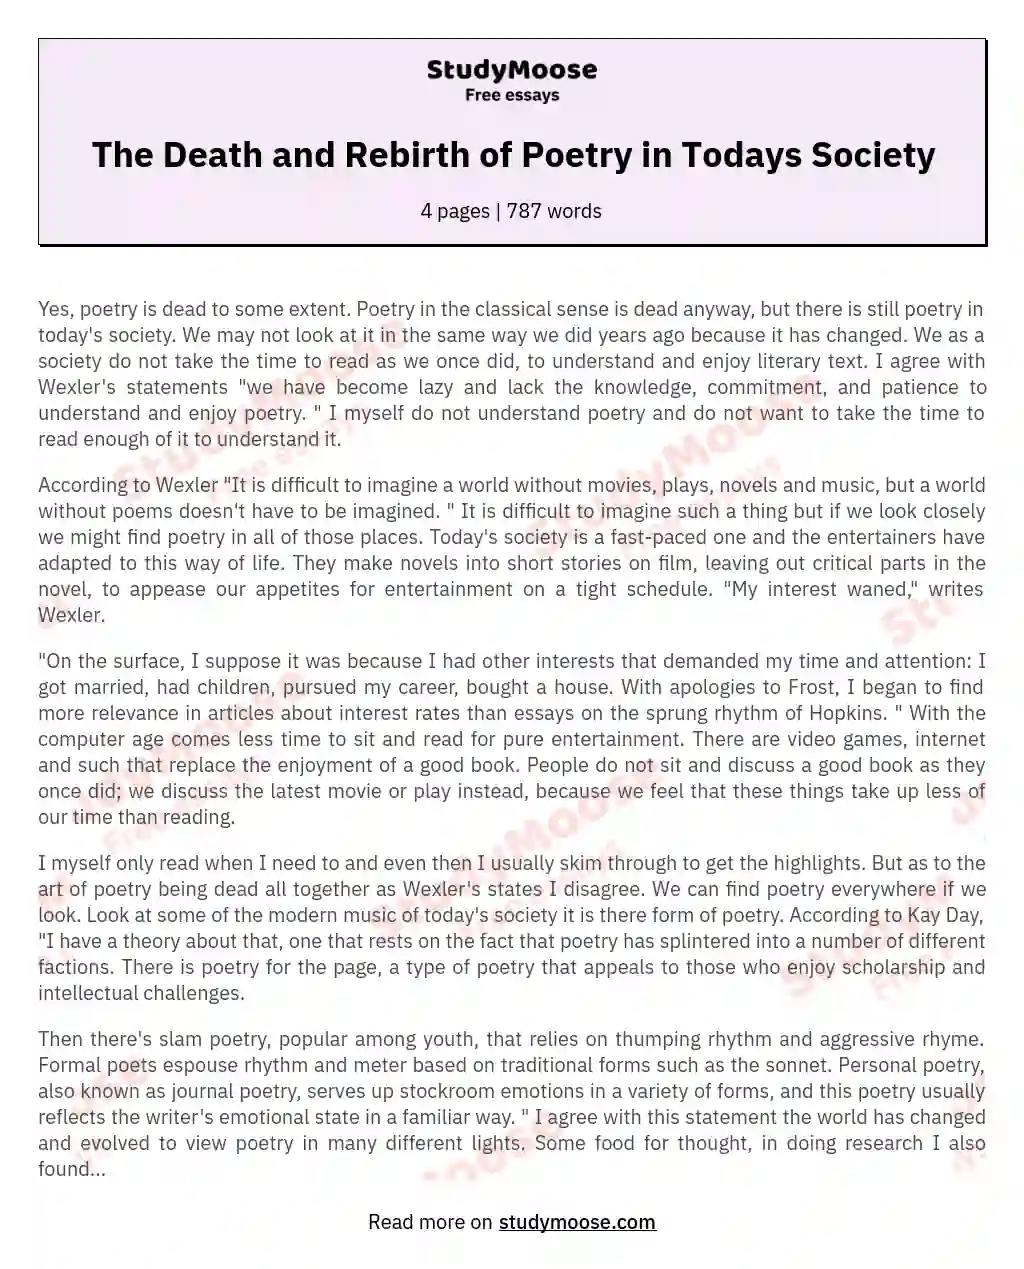 The Death and Rebirth of Poetry in Todays Society essay